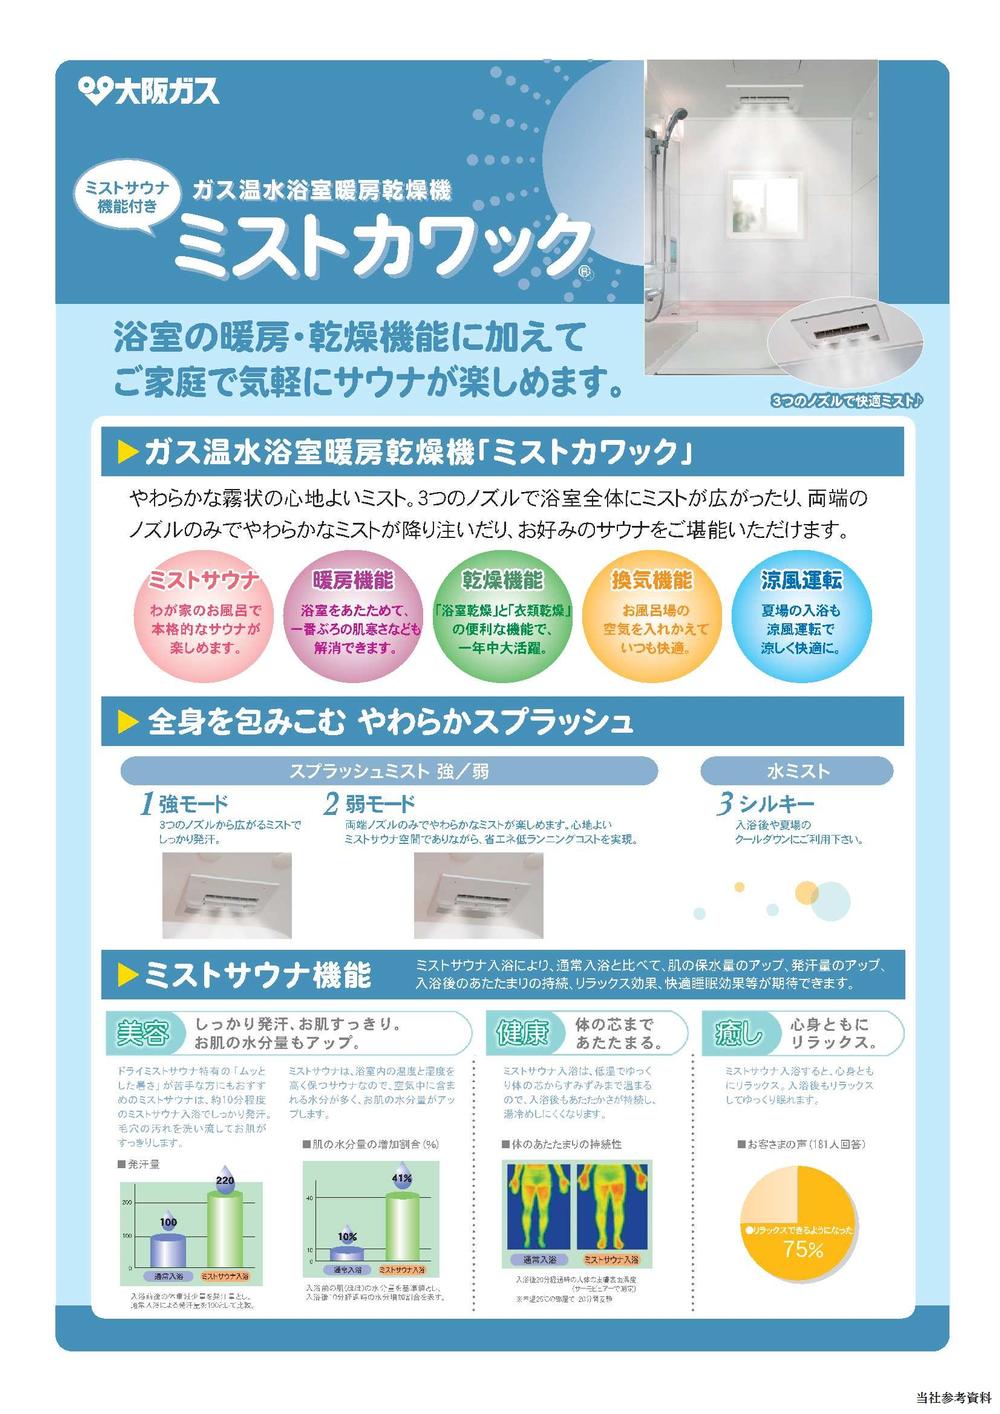 Other. Gas hot water bathroom heater dryer Ya "splash mist Kawakku" drying of the rainy season of your laundry, Or warm the winter of cold the bathroom, There is also a beautiful skin effect ☆ 